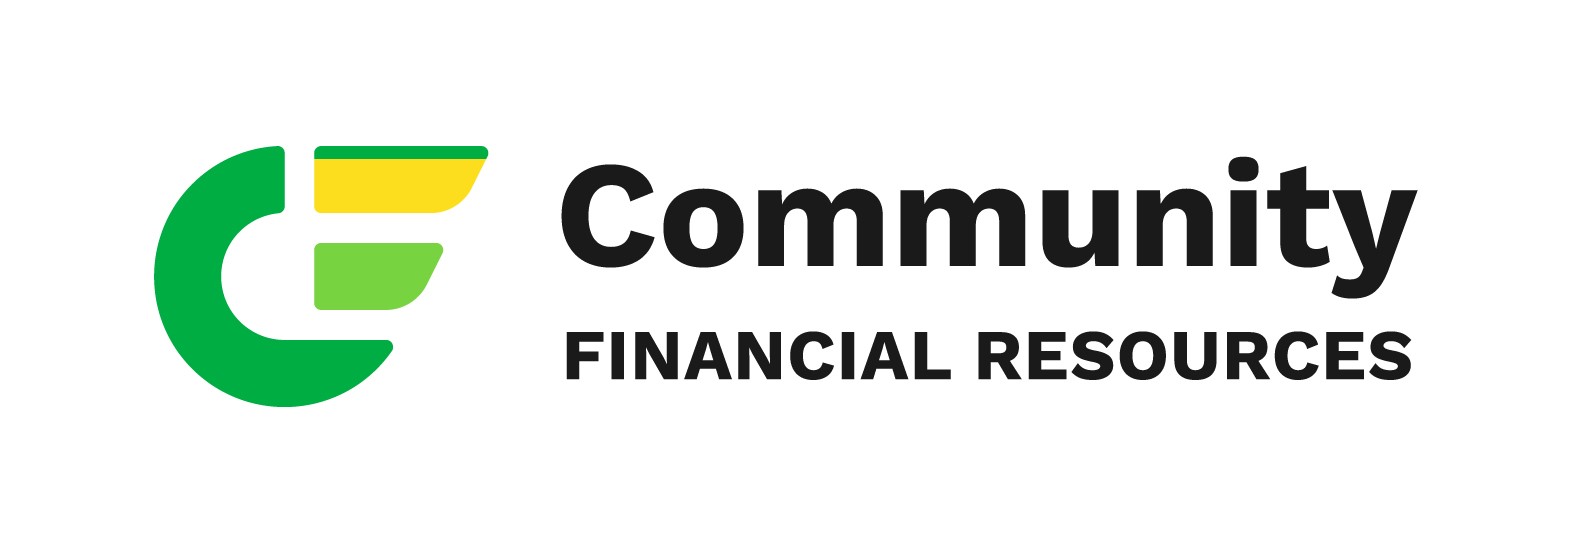 Community Financial Resources